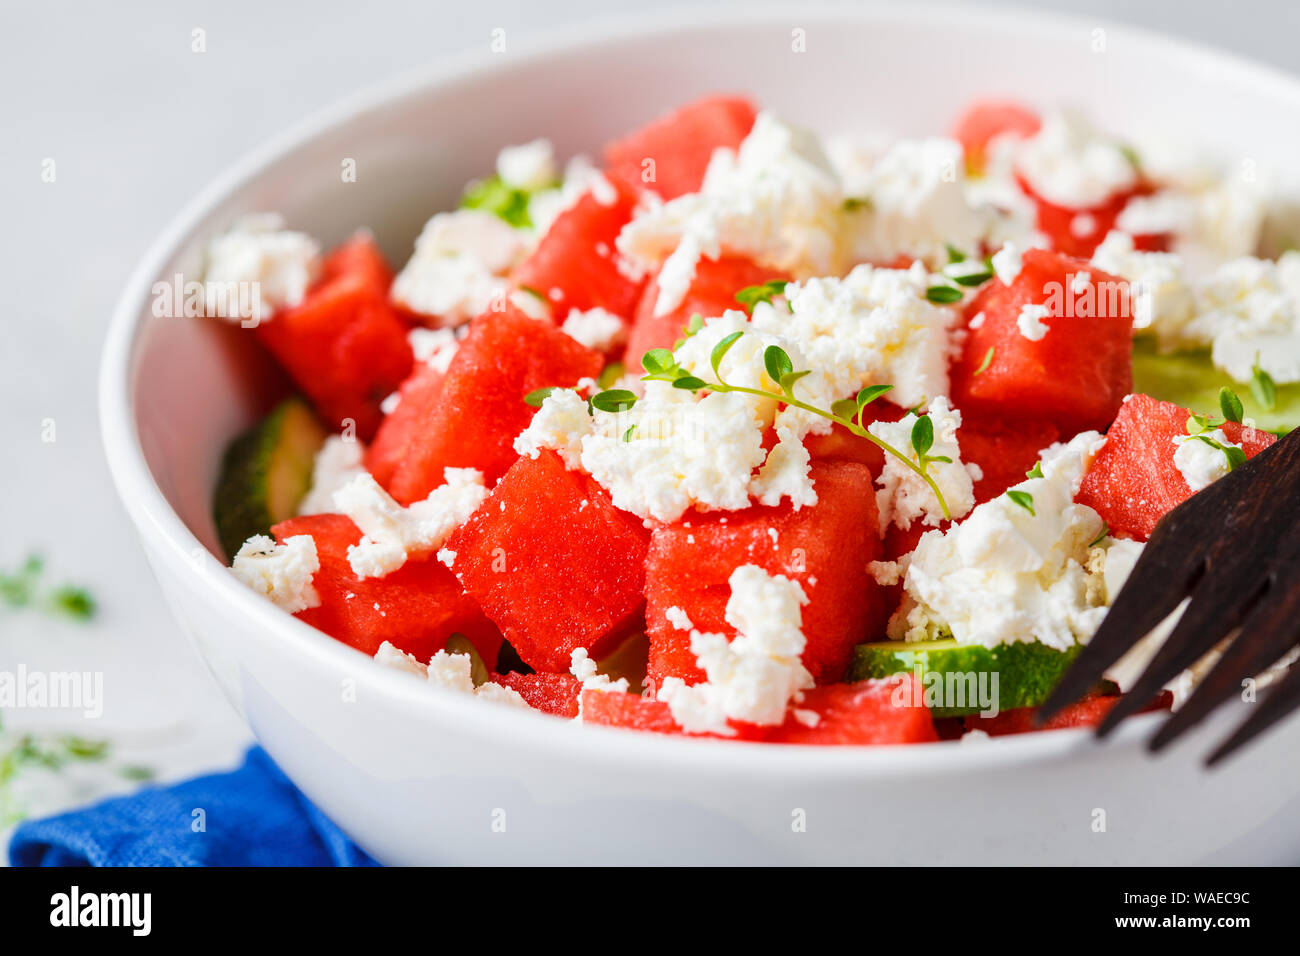 Watermelon, cucumber and feta cheese salad in a white bowl. Stock Photo